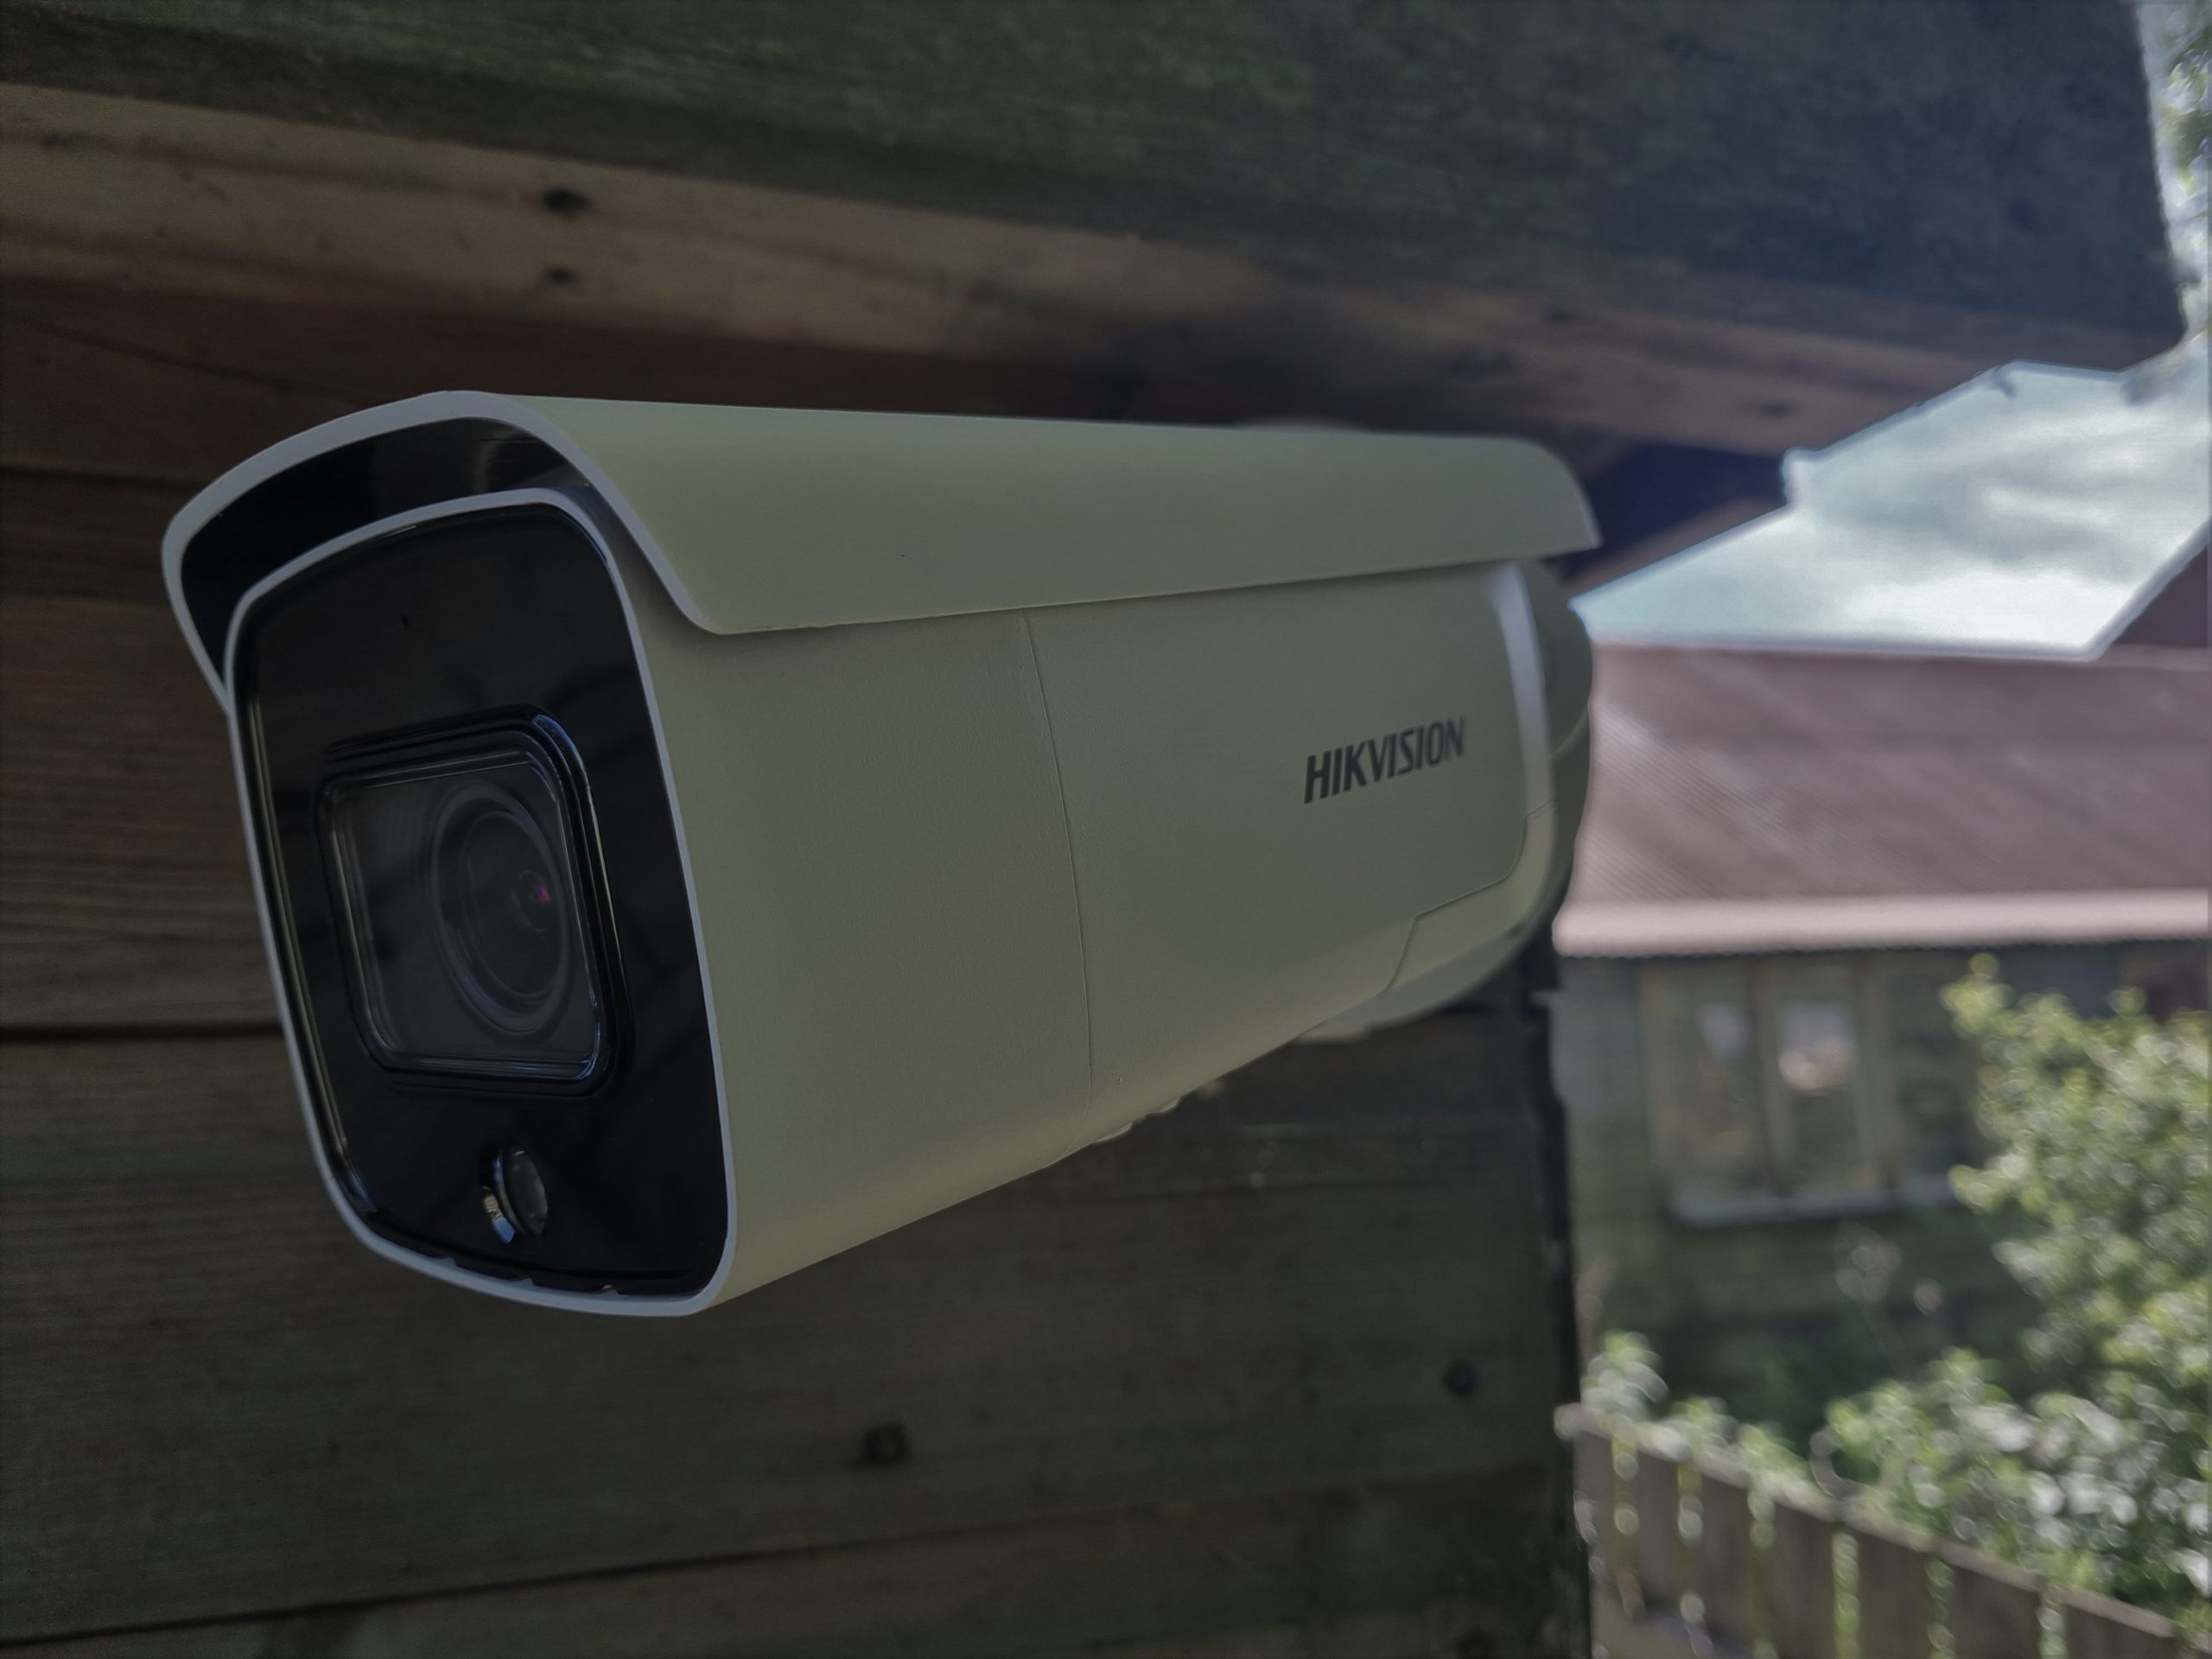 A white CCTV camera on a wooden building